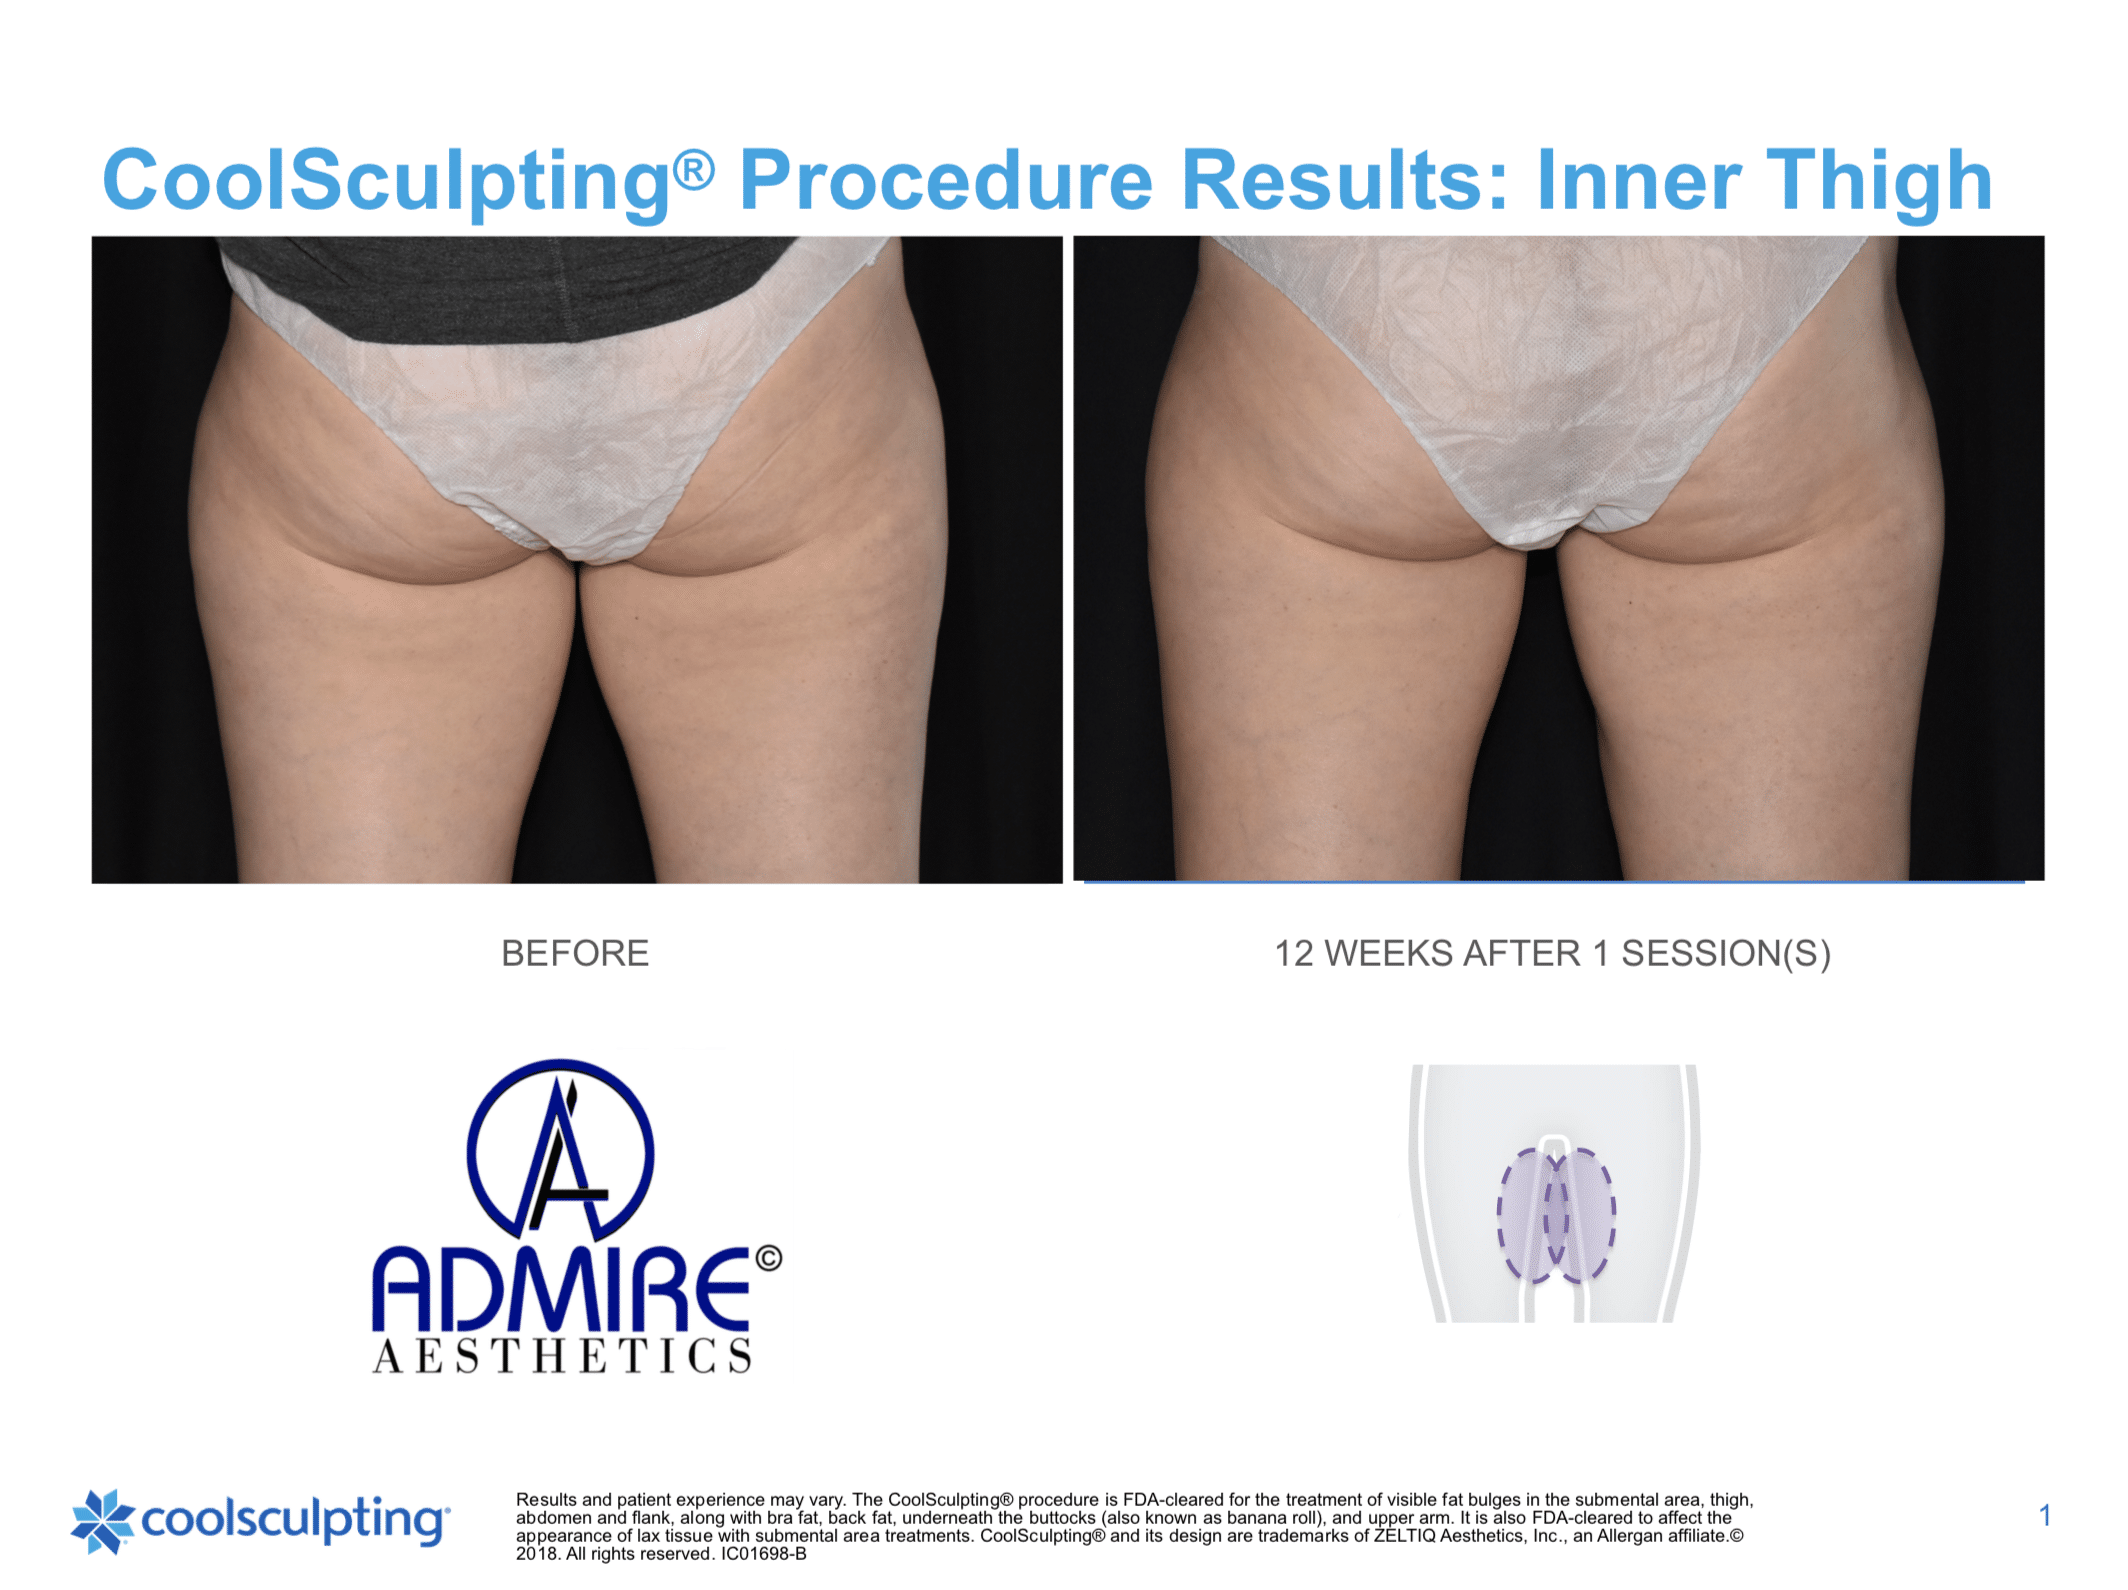 Buttocks before and after coolsculpting treatment at Admire Aesthetics in Medford, OR.